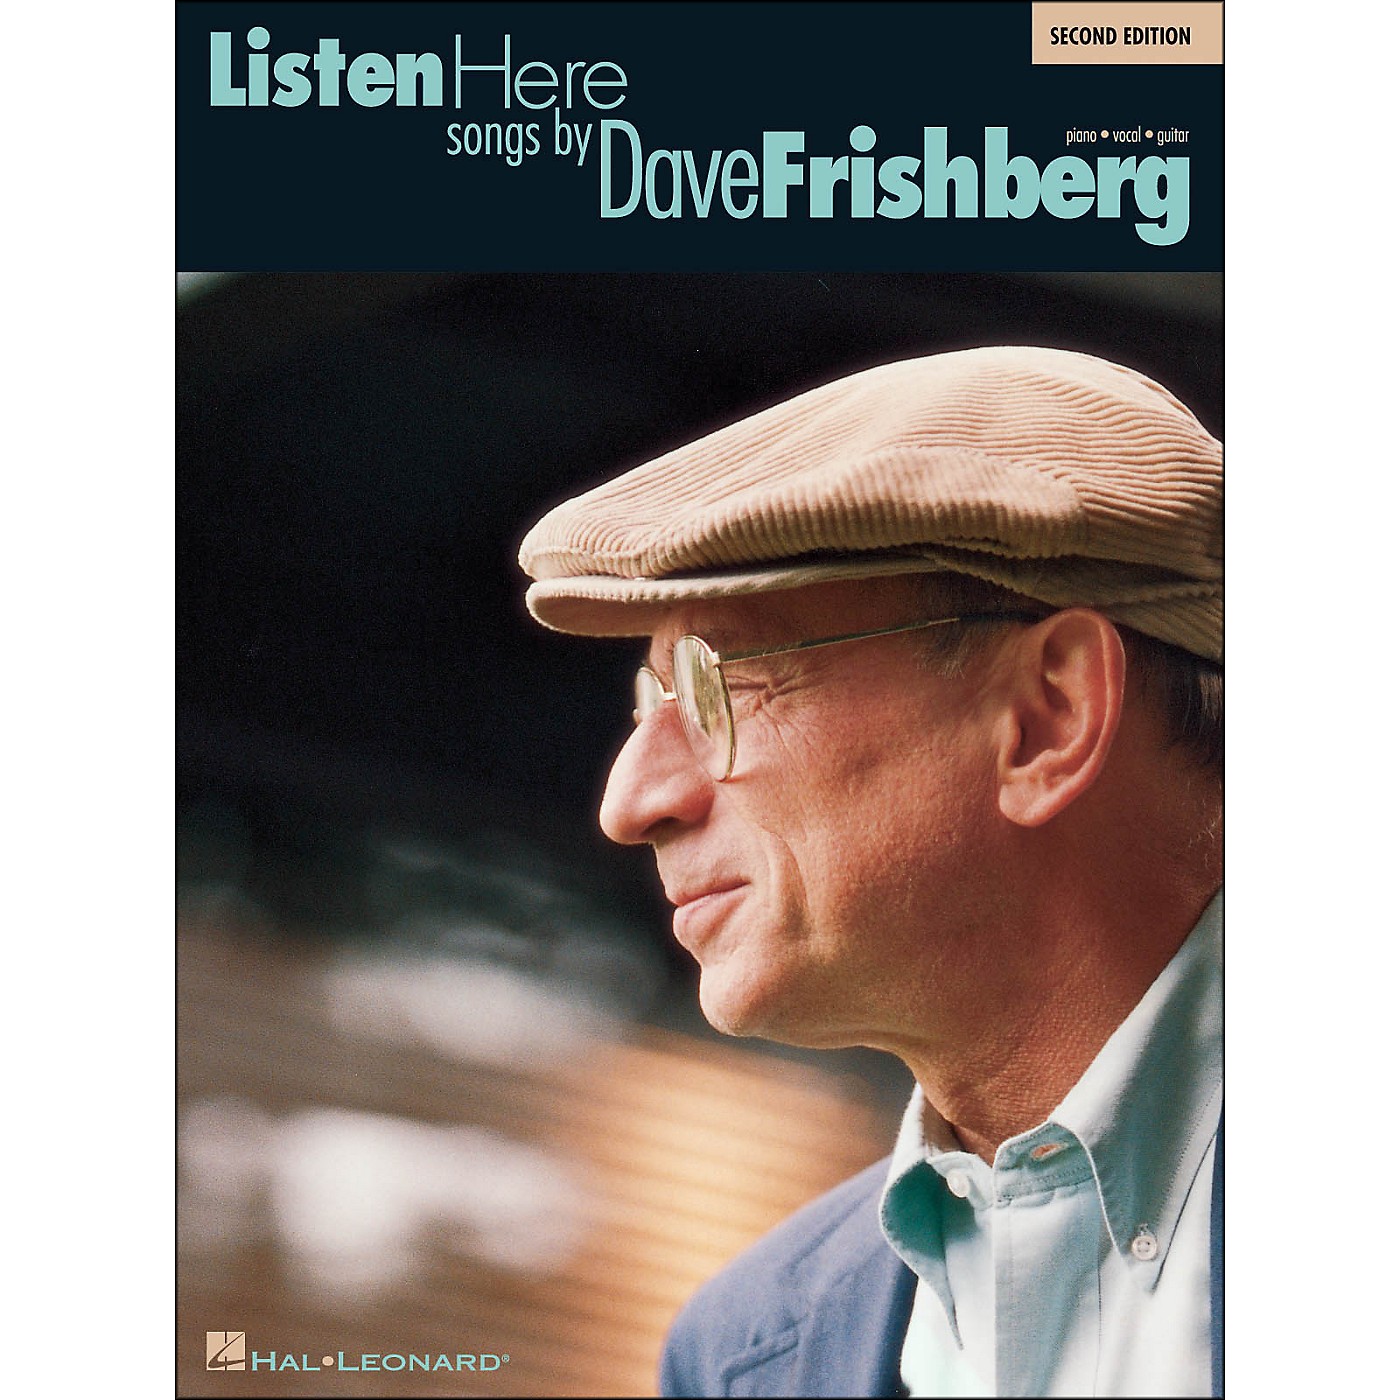 Hal Leonard Listen Here Songs By Dave Frishberg 2nd Edition arranged for piano, vocal, and guitar (P/V/G) thumbnail